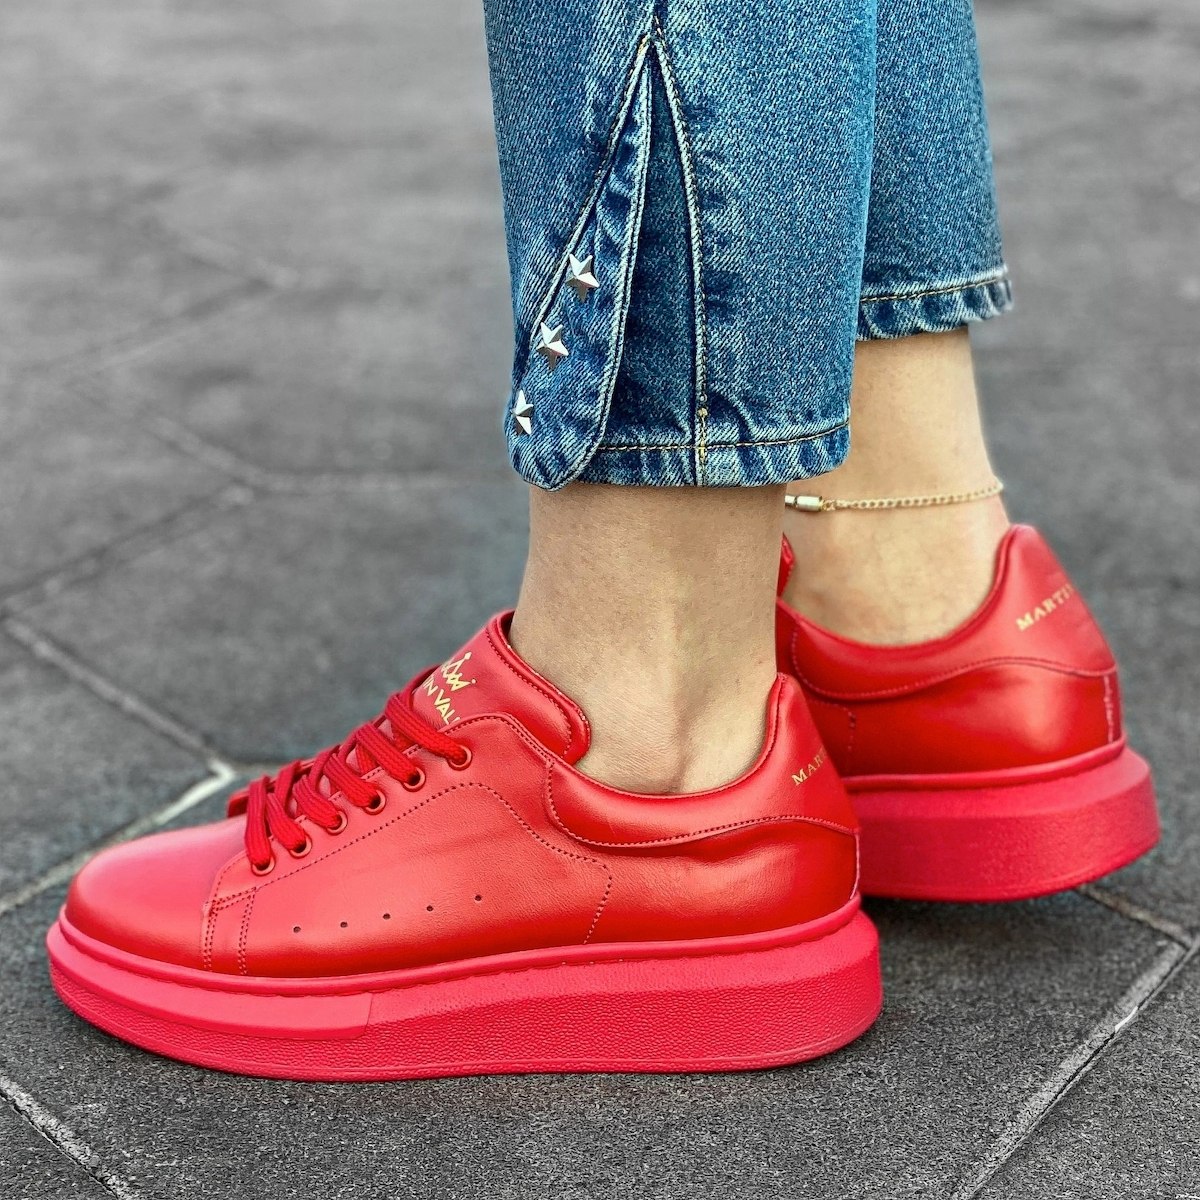 Woman's Hype Sole Sneakers In Full Red